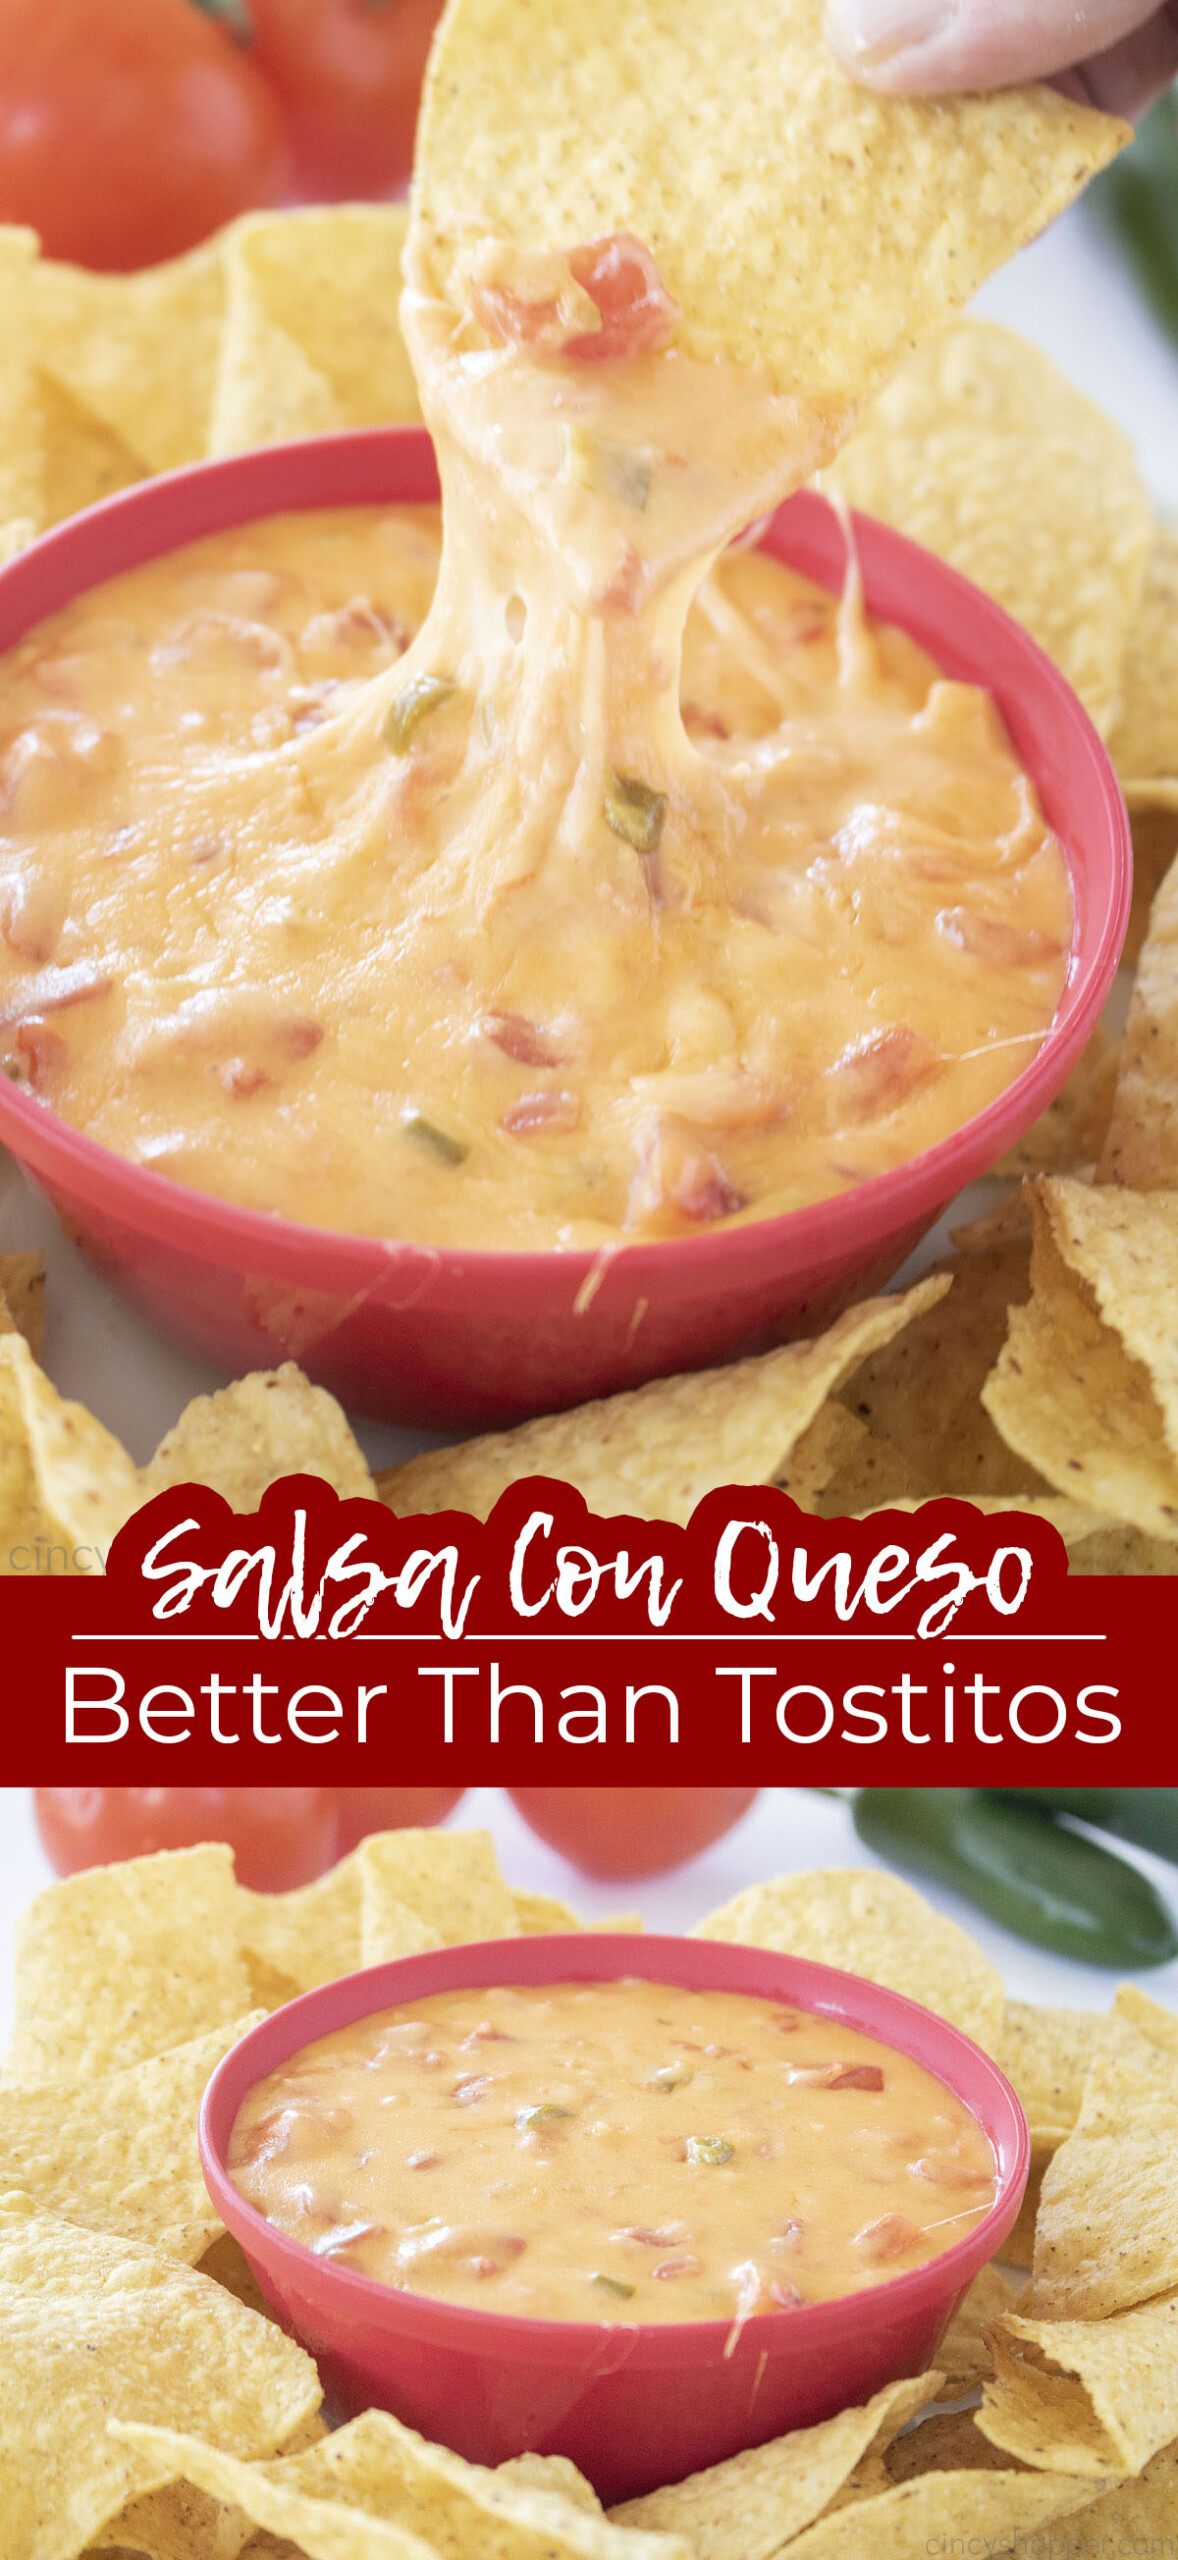 Long pin Text on image Salsa Con Queso Better than Tostitos